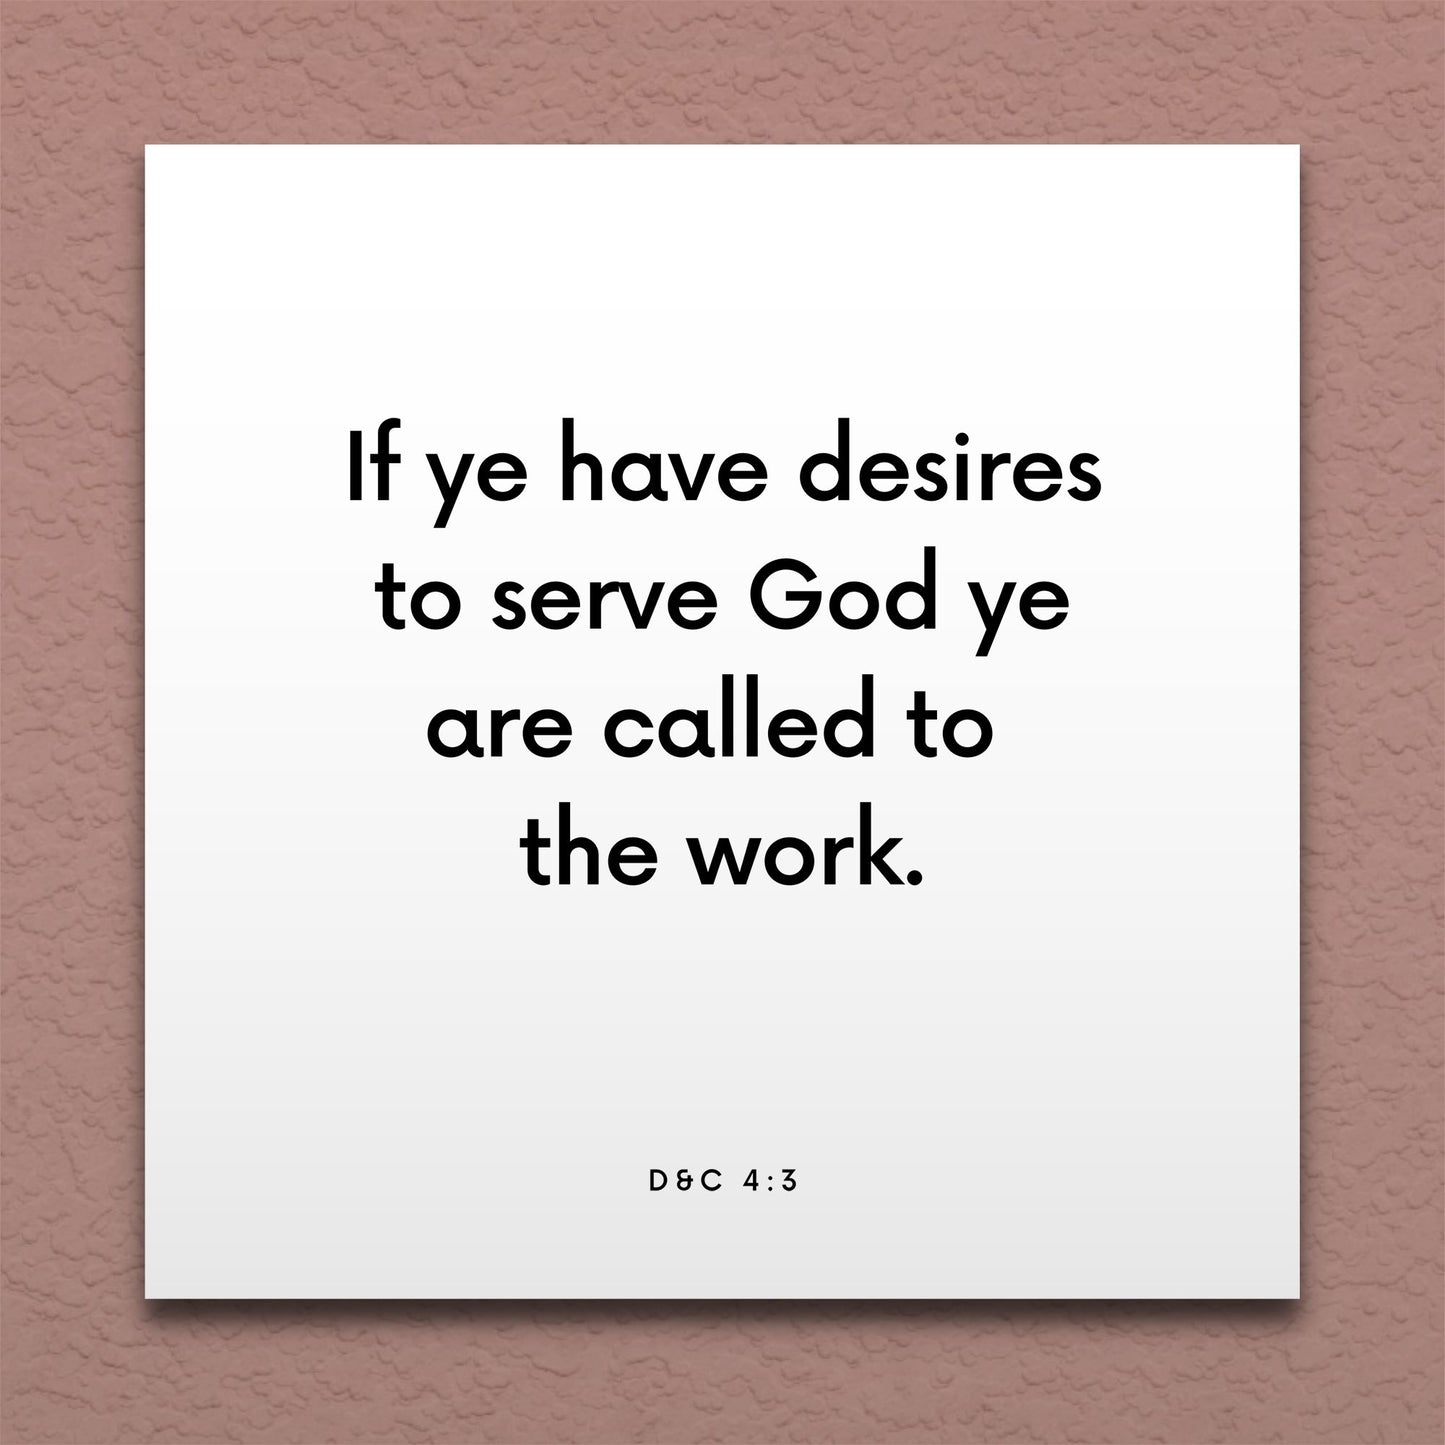 Wall-mounted scripture tile for D&C 4:3 - "If ye have desires to serve God ye are called to the work"